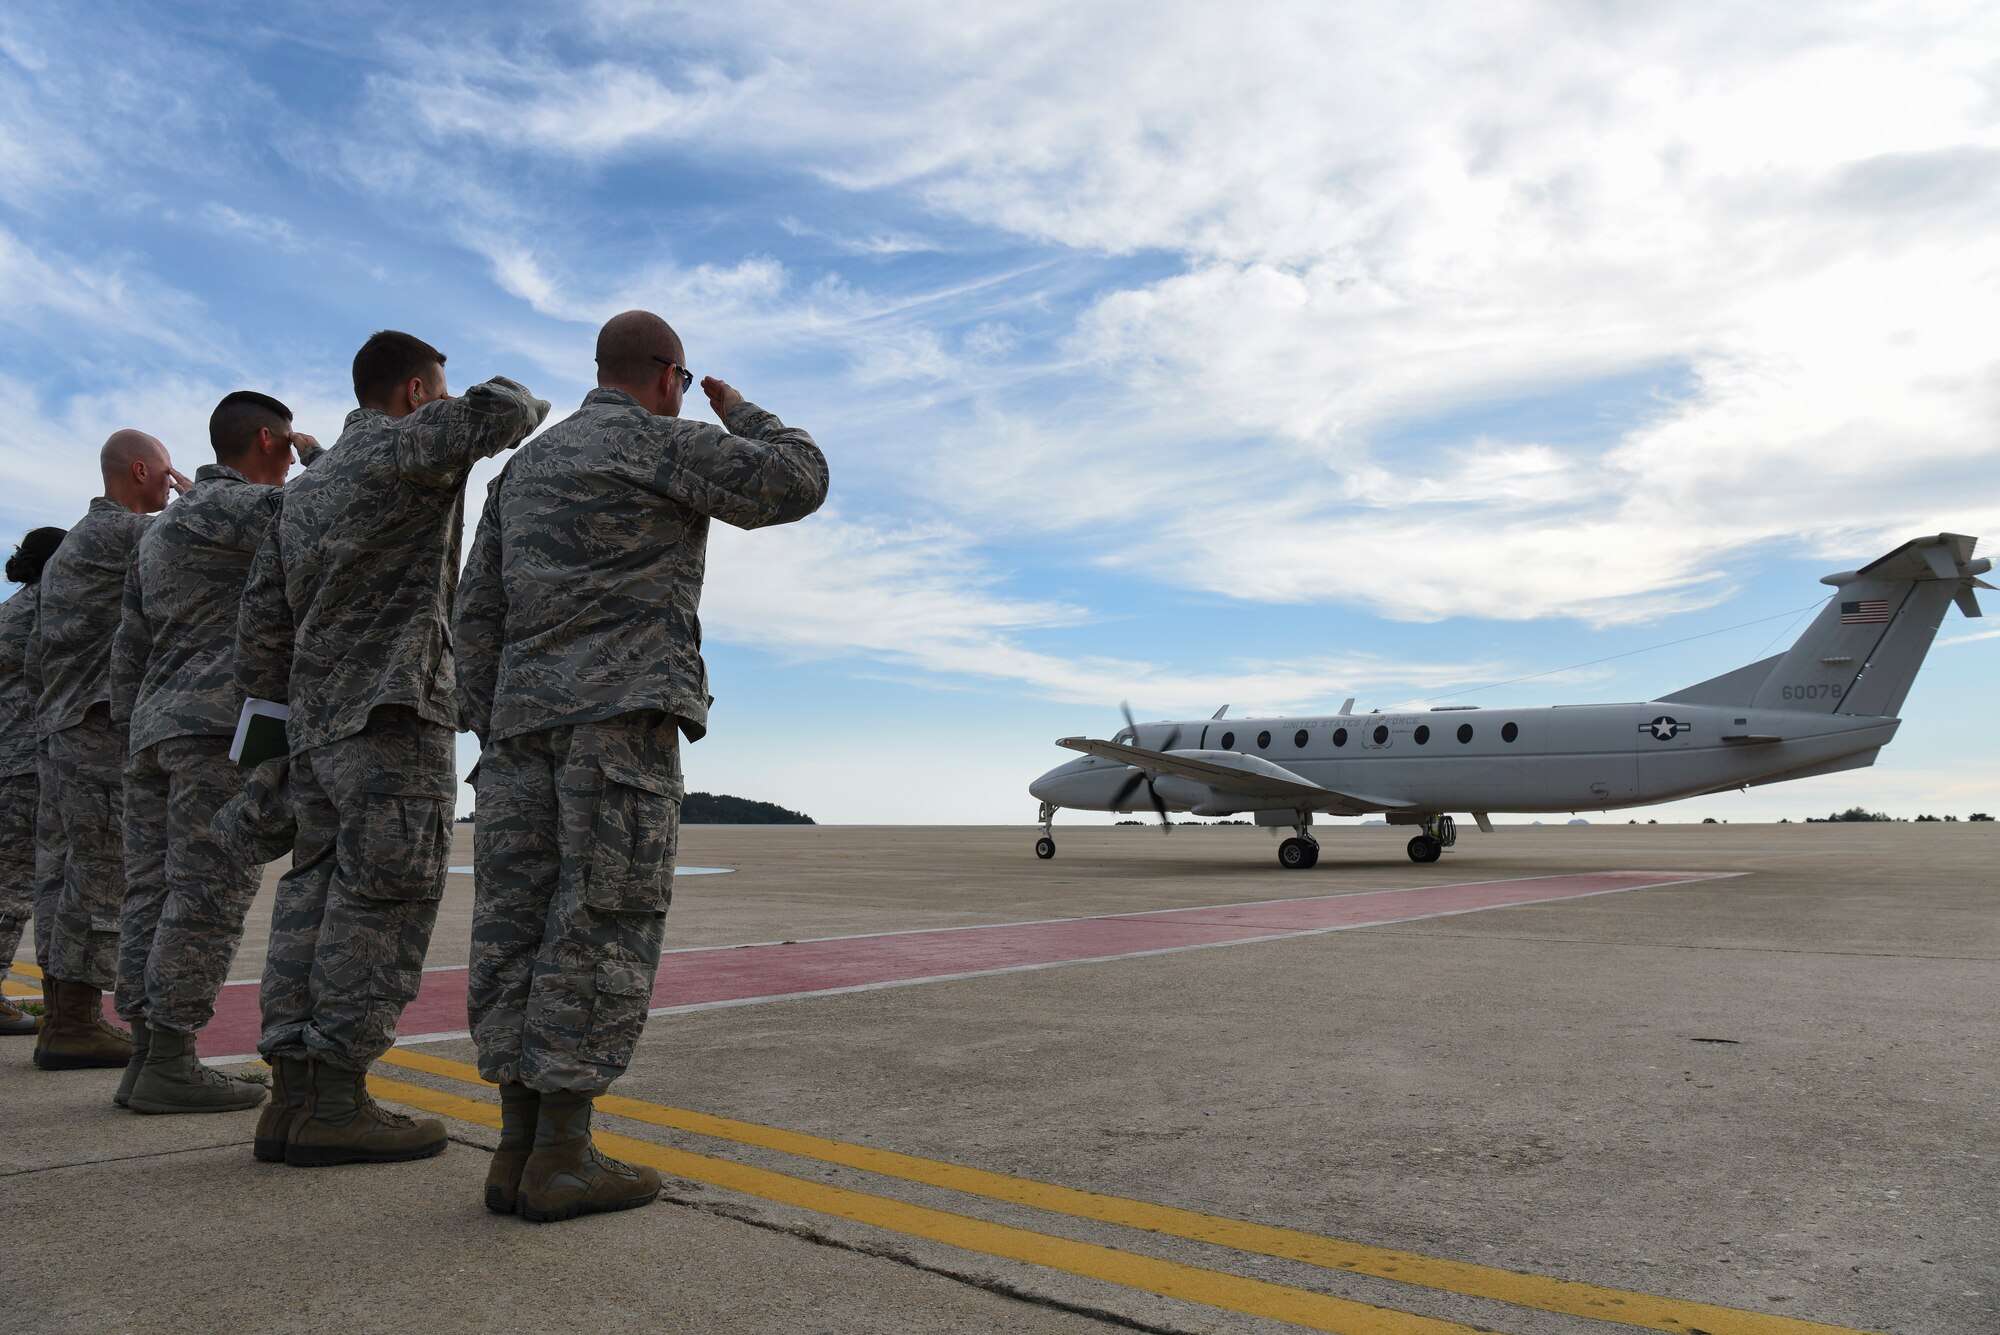 U.S. Air Force Col. John Bosone, 8th Fighter Wing commander or “Wolf 58” (right), and 8th Fighter Wing Airmen salute Gen. CQ Brown, Jr., Pacific Air Forces commander, during his departure from Kunsan Air Base, Republic of Korea, Aug. 29, 2018. Brown, a former 35th Fighter Squadron pilot and Kunsan wing commander, then-called “Wolf 46” toured the 8th Fighter Wing, meeting with Airmen and learning about the base’s current overall mission capabilities. (U.S. Air Force photo by Senior Airman Savannah L. Waters)